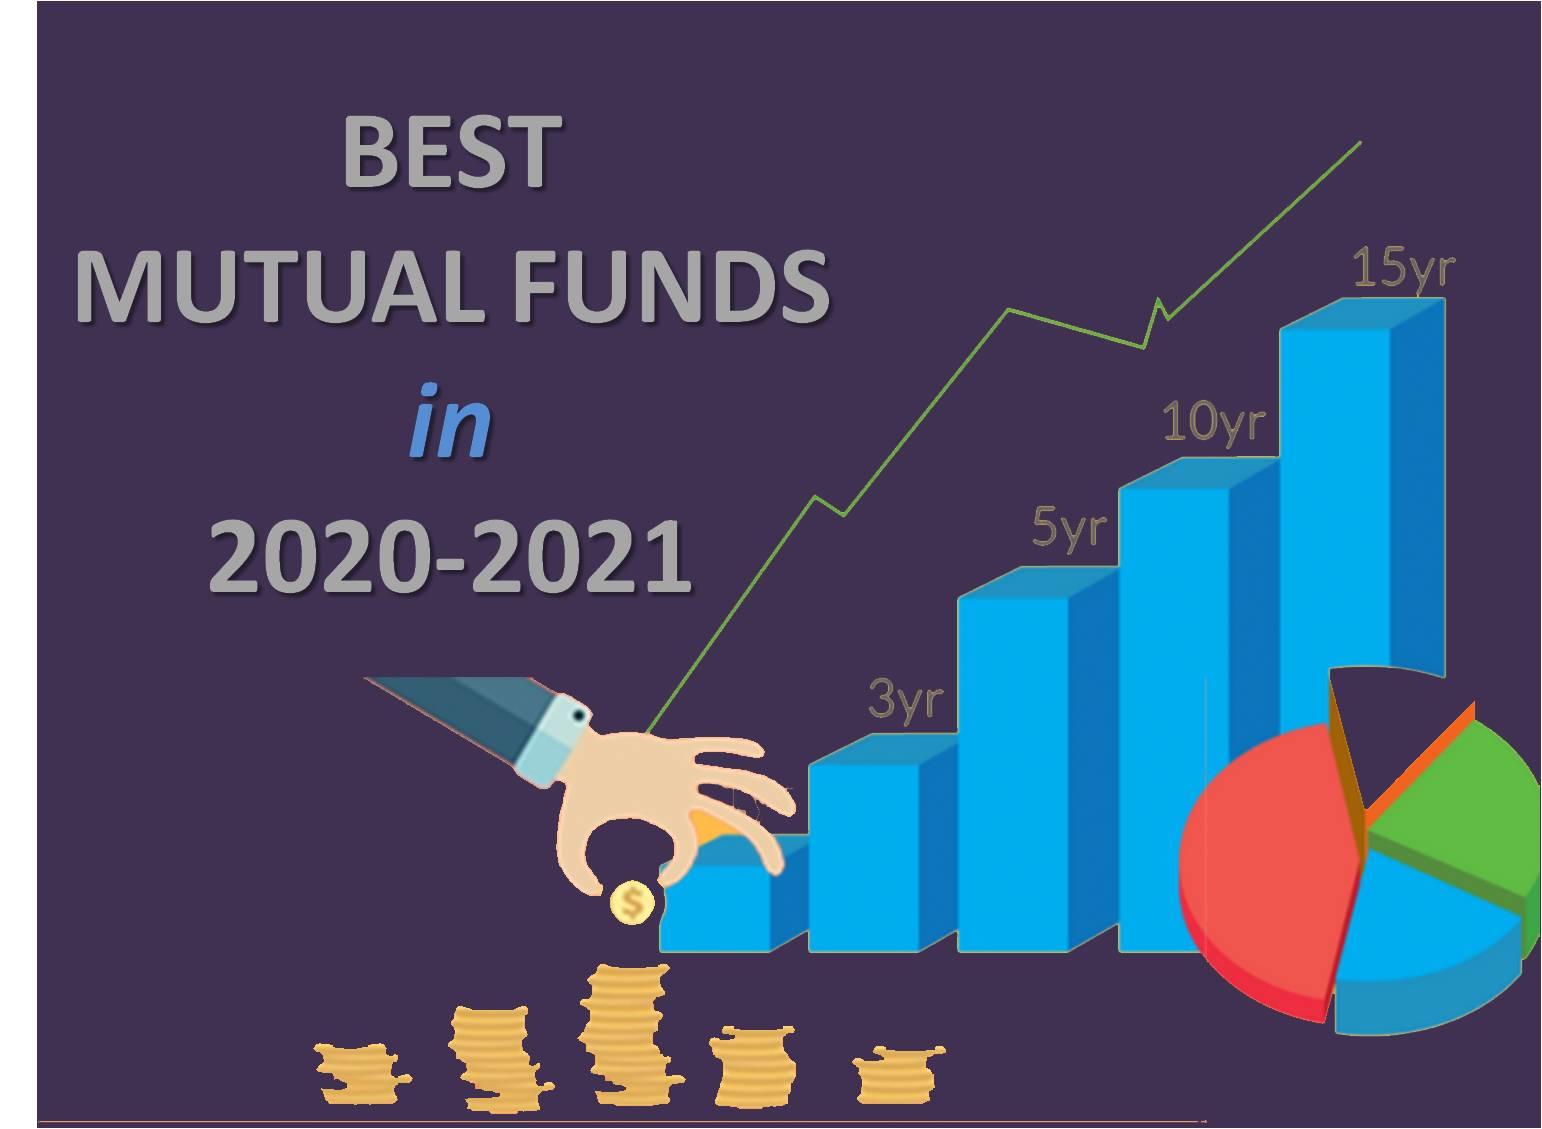 Best Mutual Funds to invest through Systematic Investment Plan